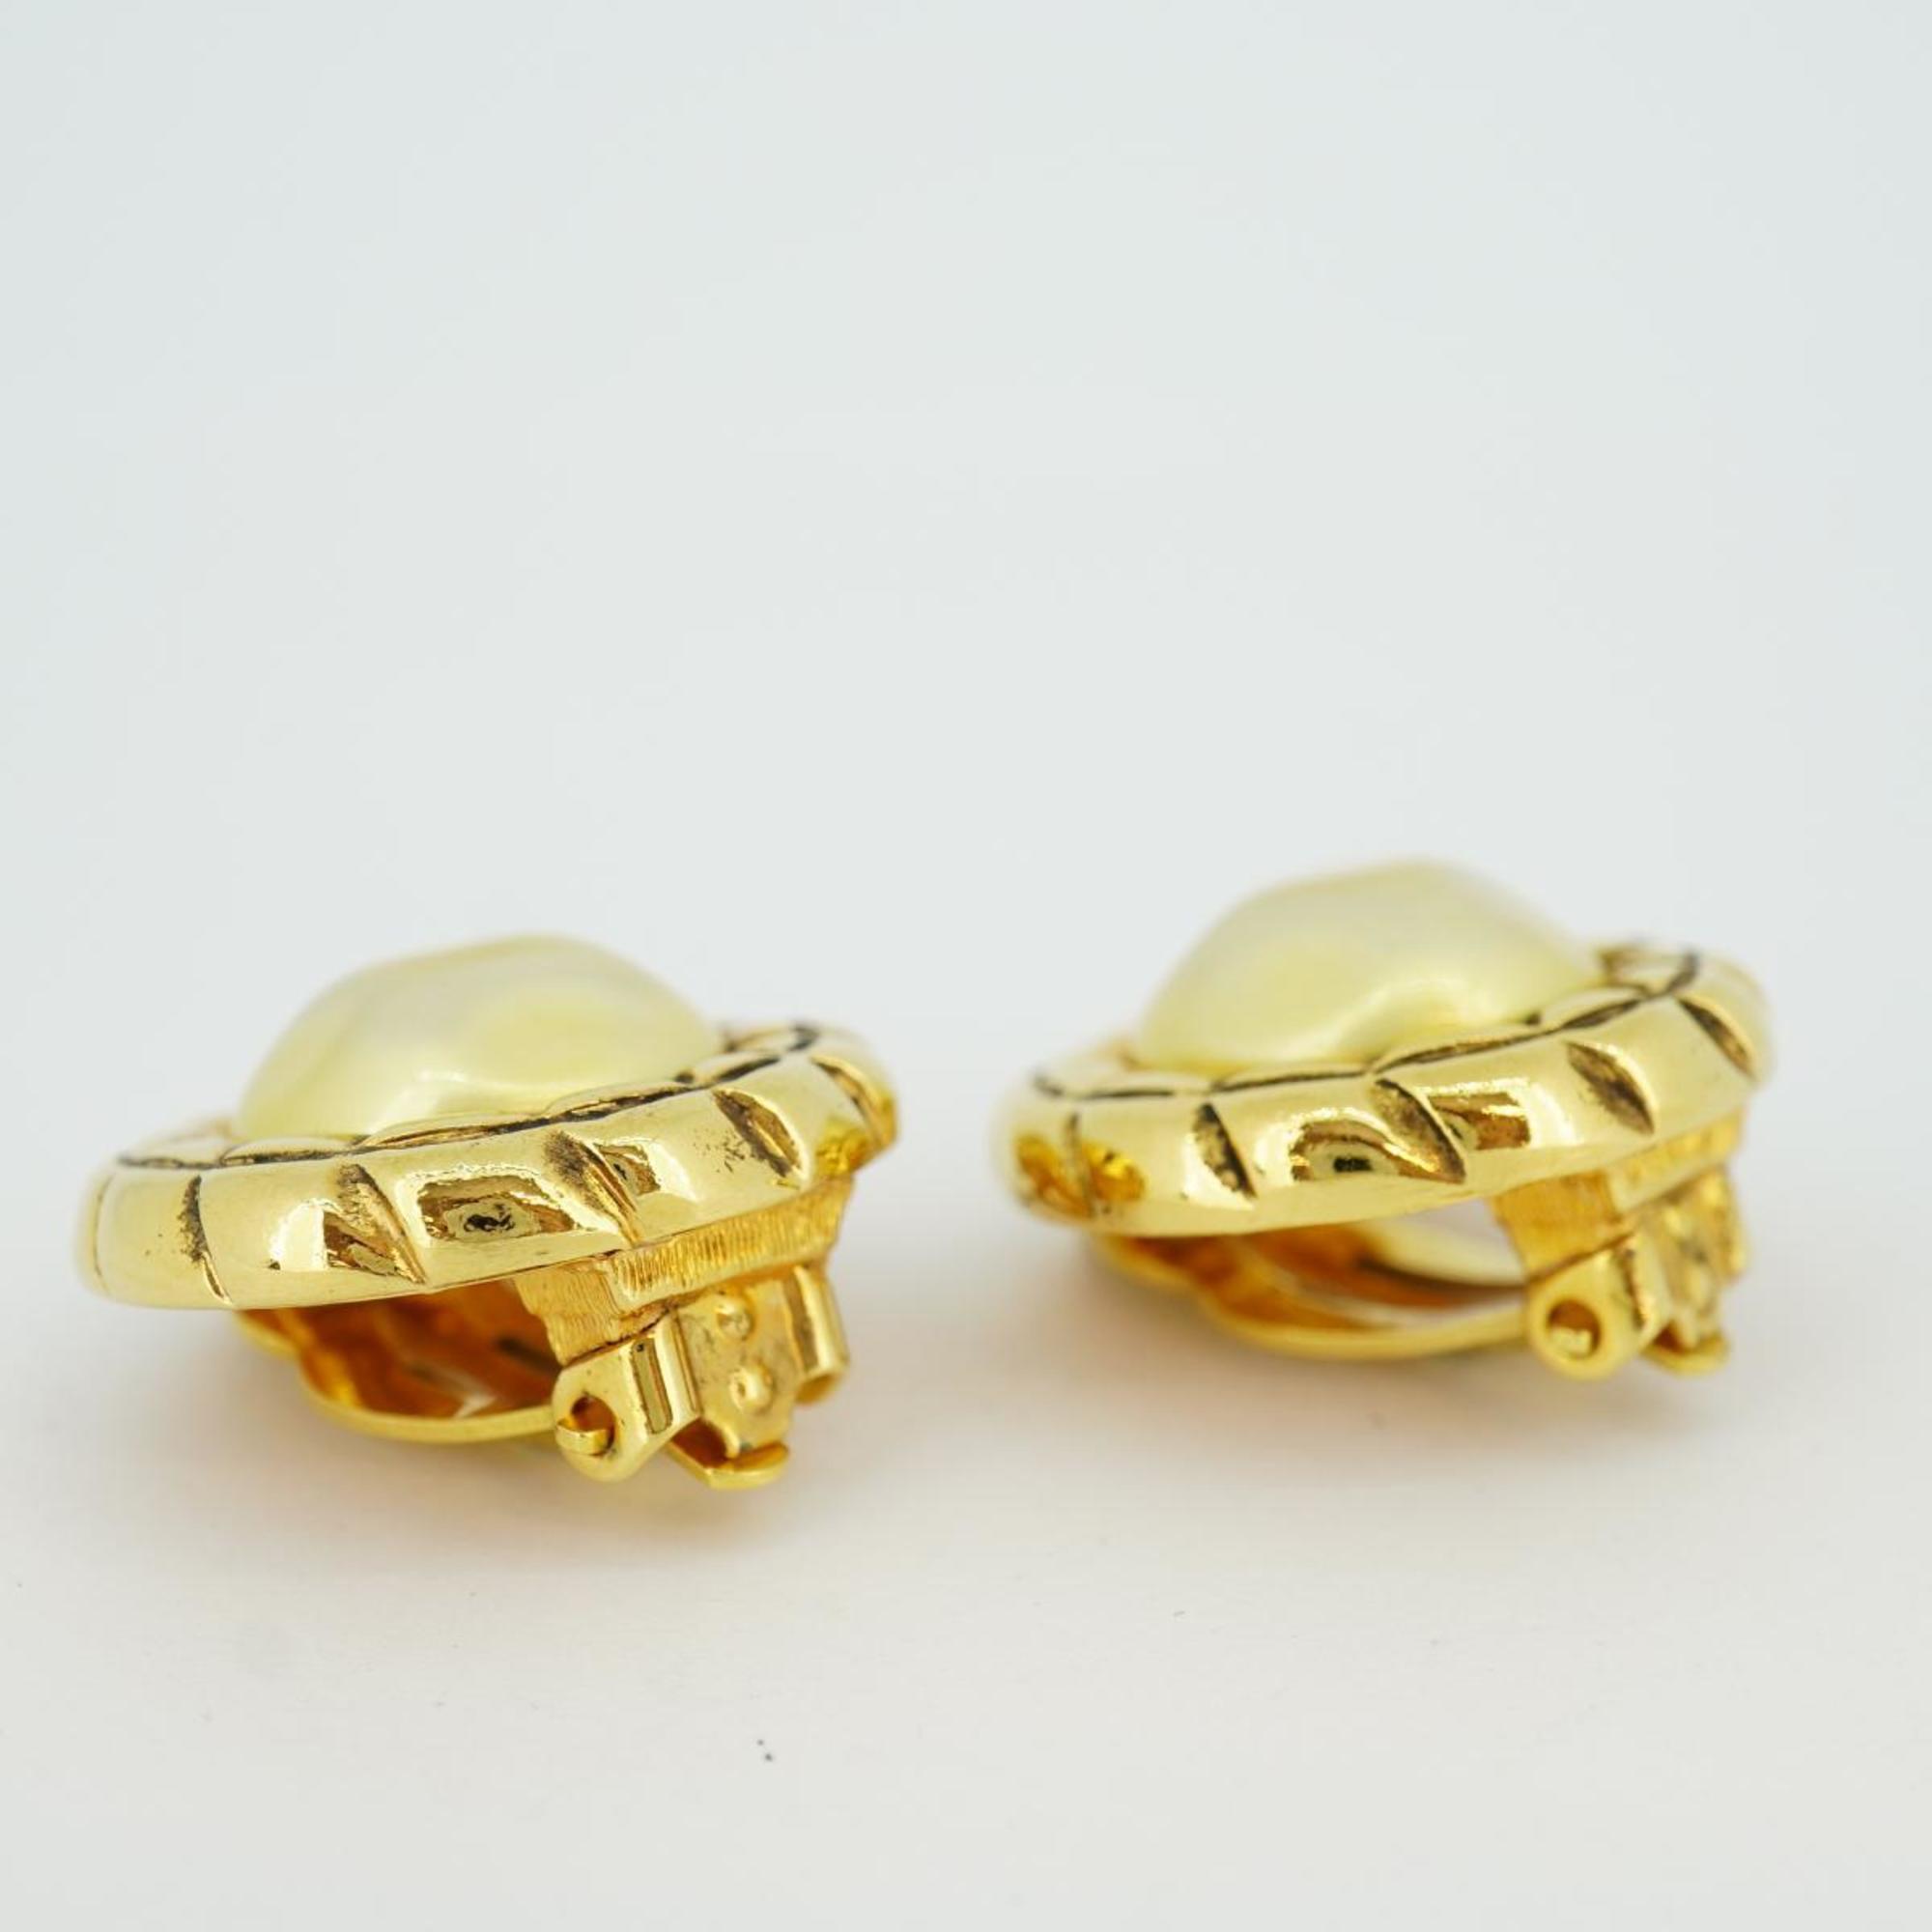 Chanel Earrings, Fake Pearl, GP Plated, Gold, Women's